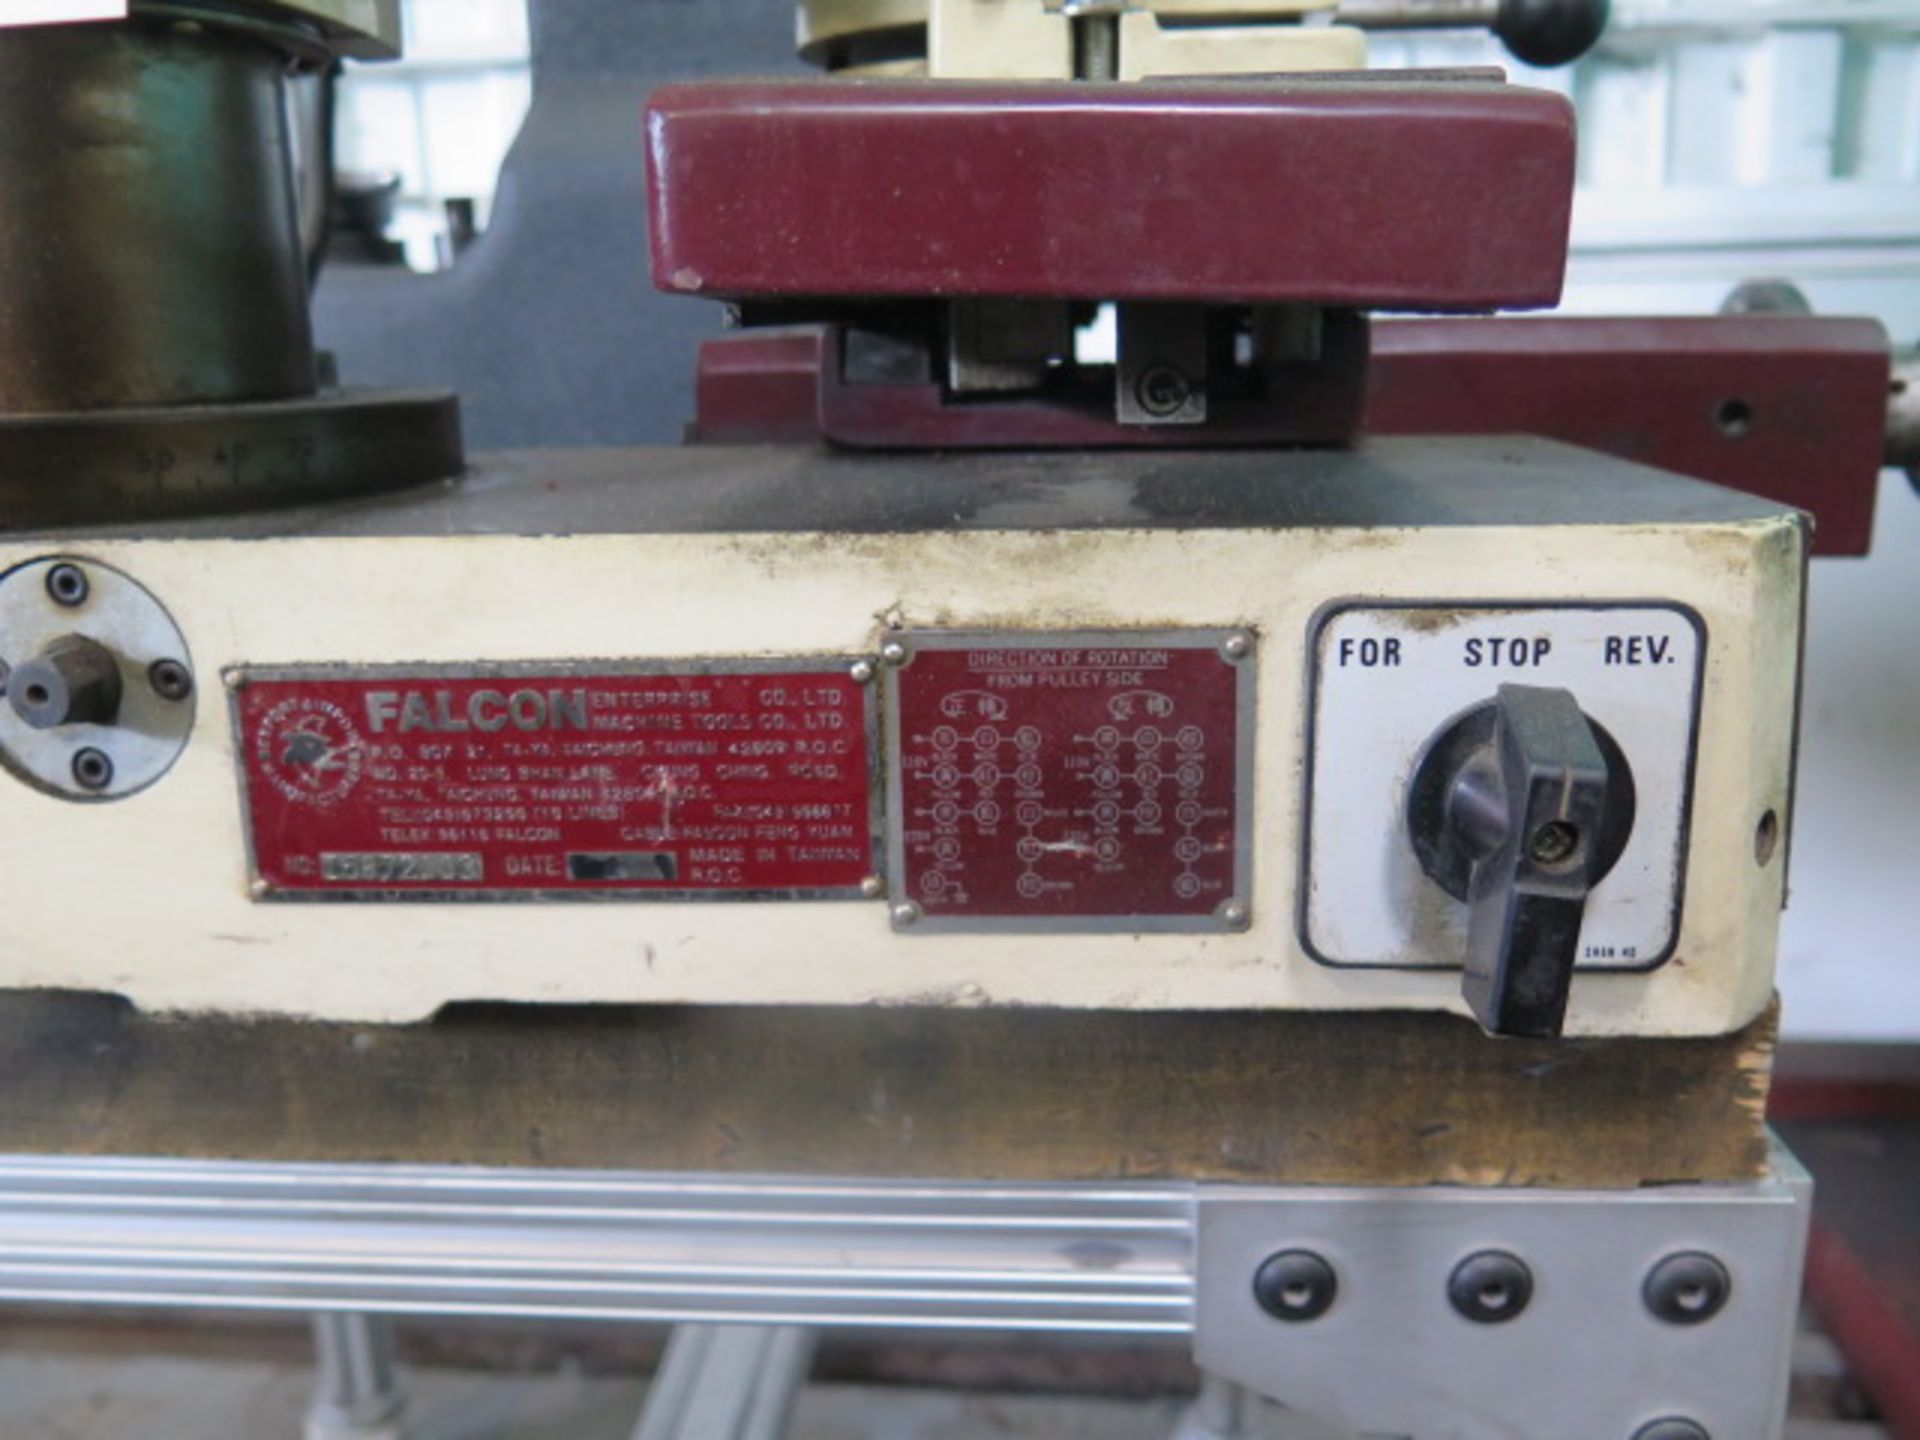 Falcon Endmill Grinder s/n I5872003 w/ Air Fixture, Diamond Wheel (SOLD AS-IS - NO WARRANTY) - Image 7 of 8